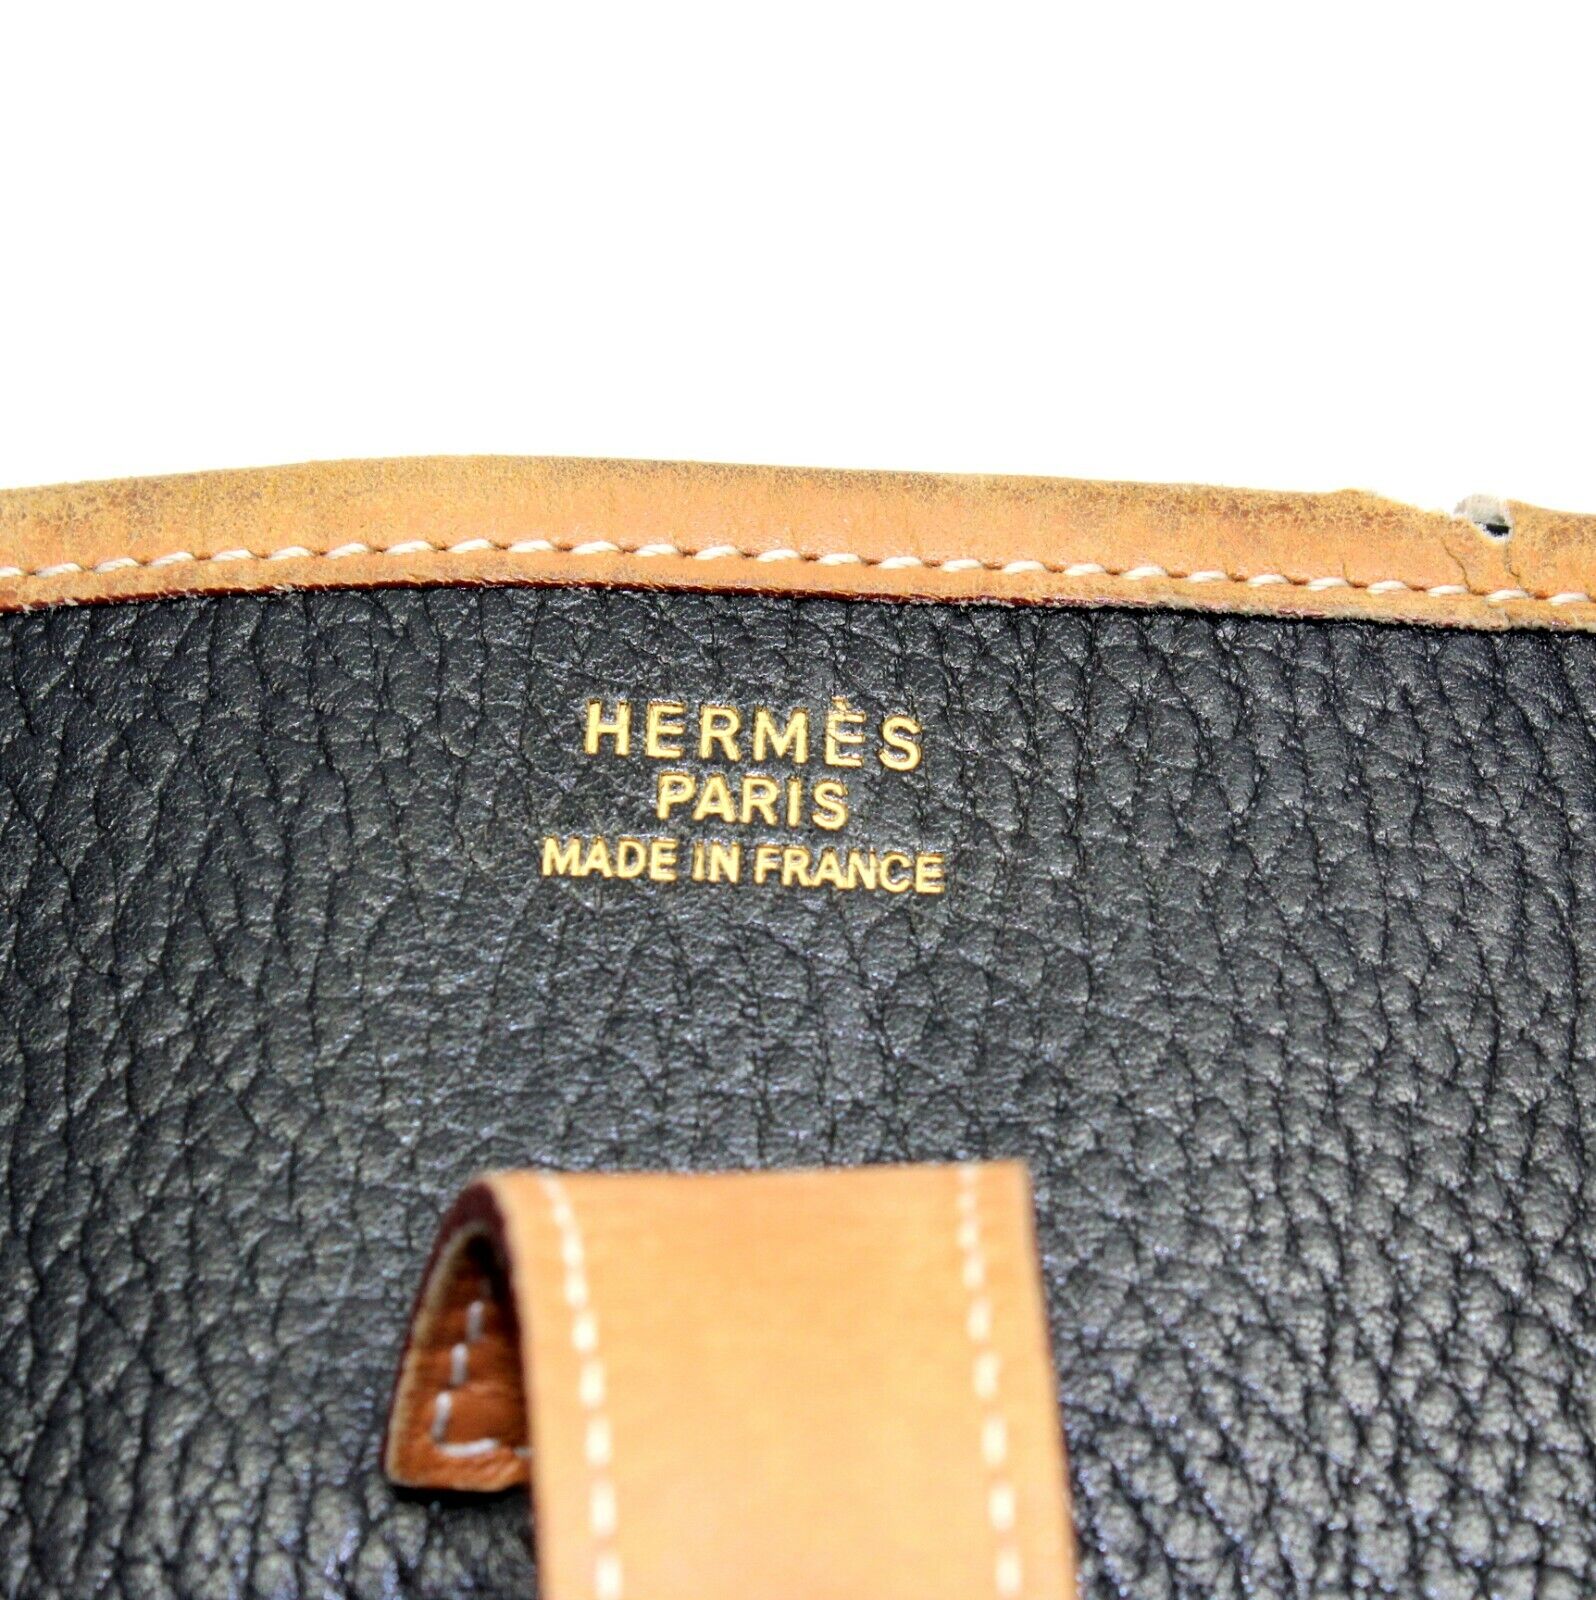 What every collector needs to know about Hermès handbags | Christie's